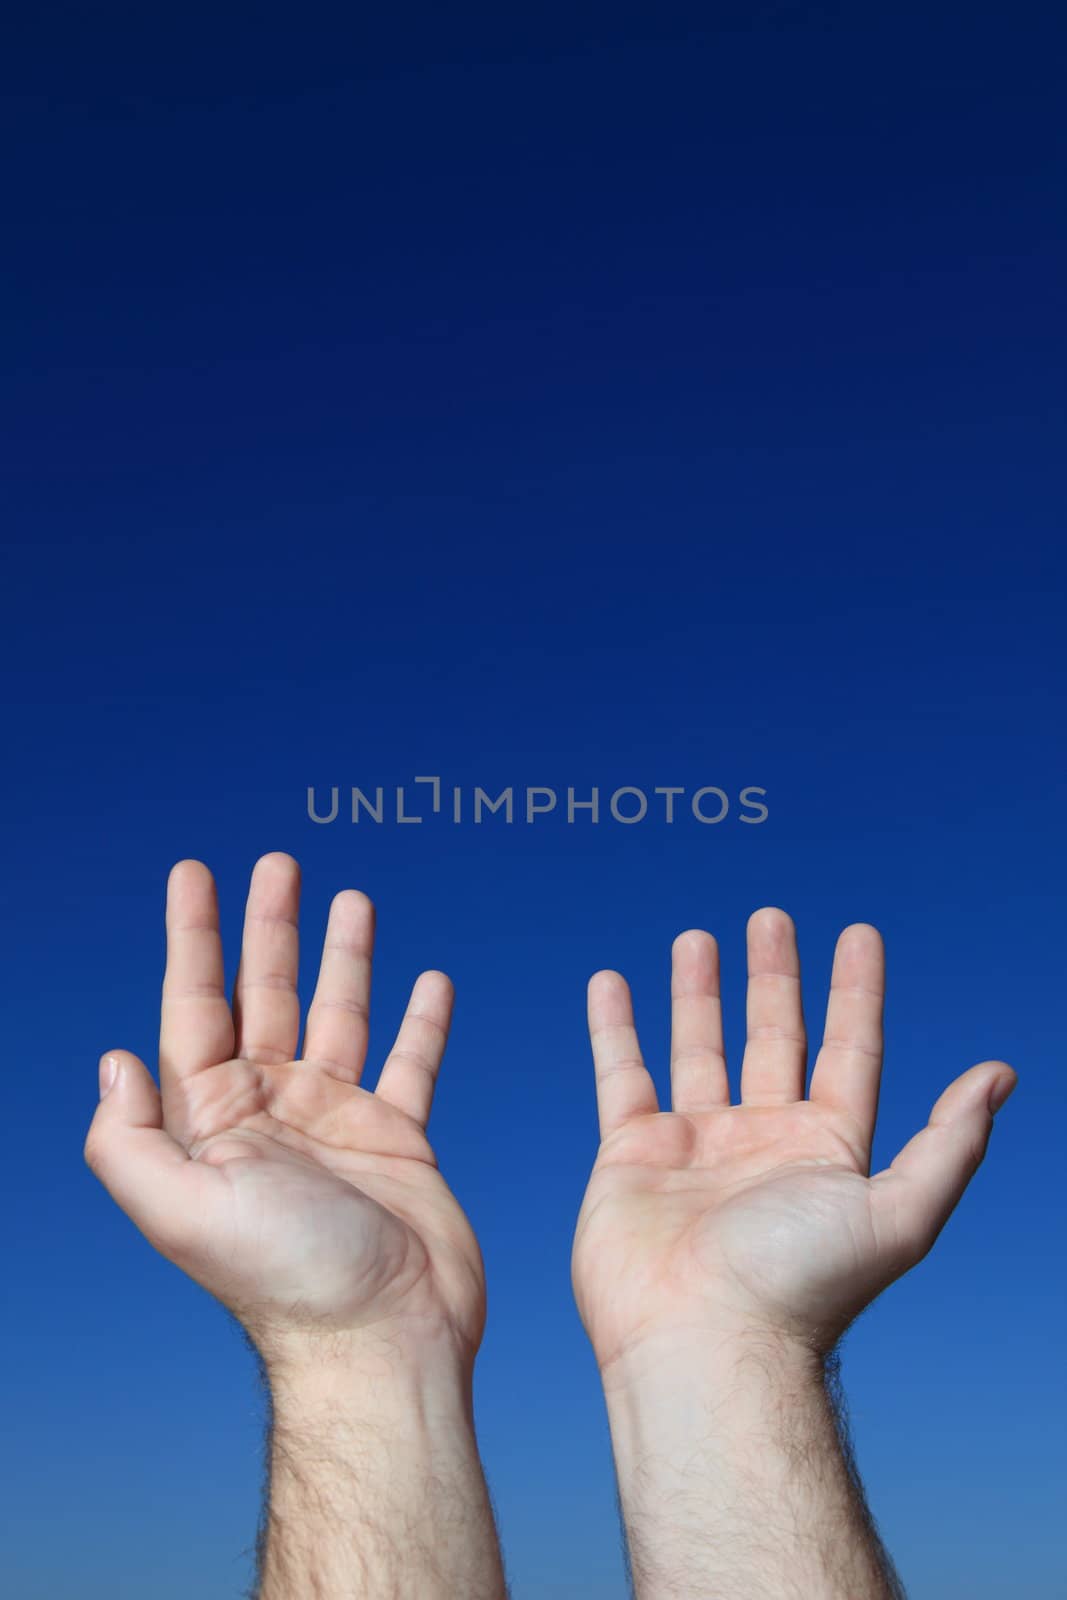 A persons hands praying to the sky.